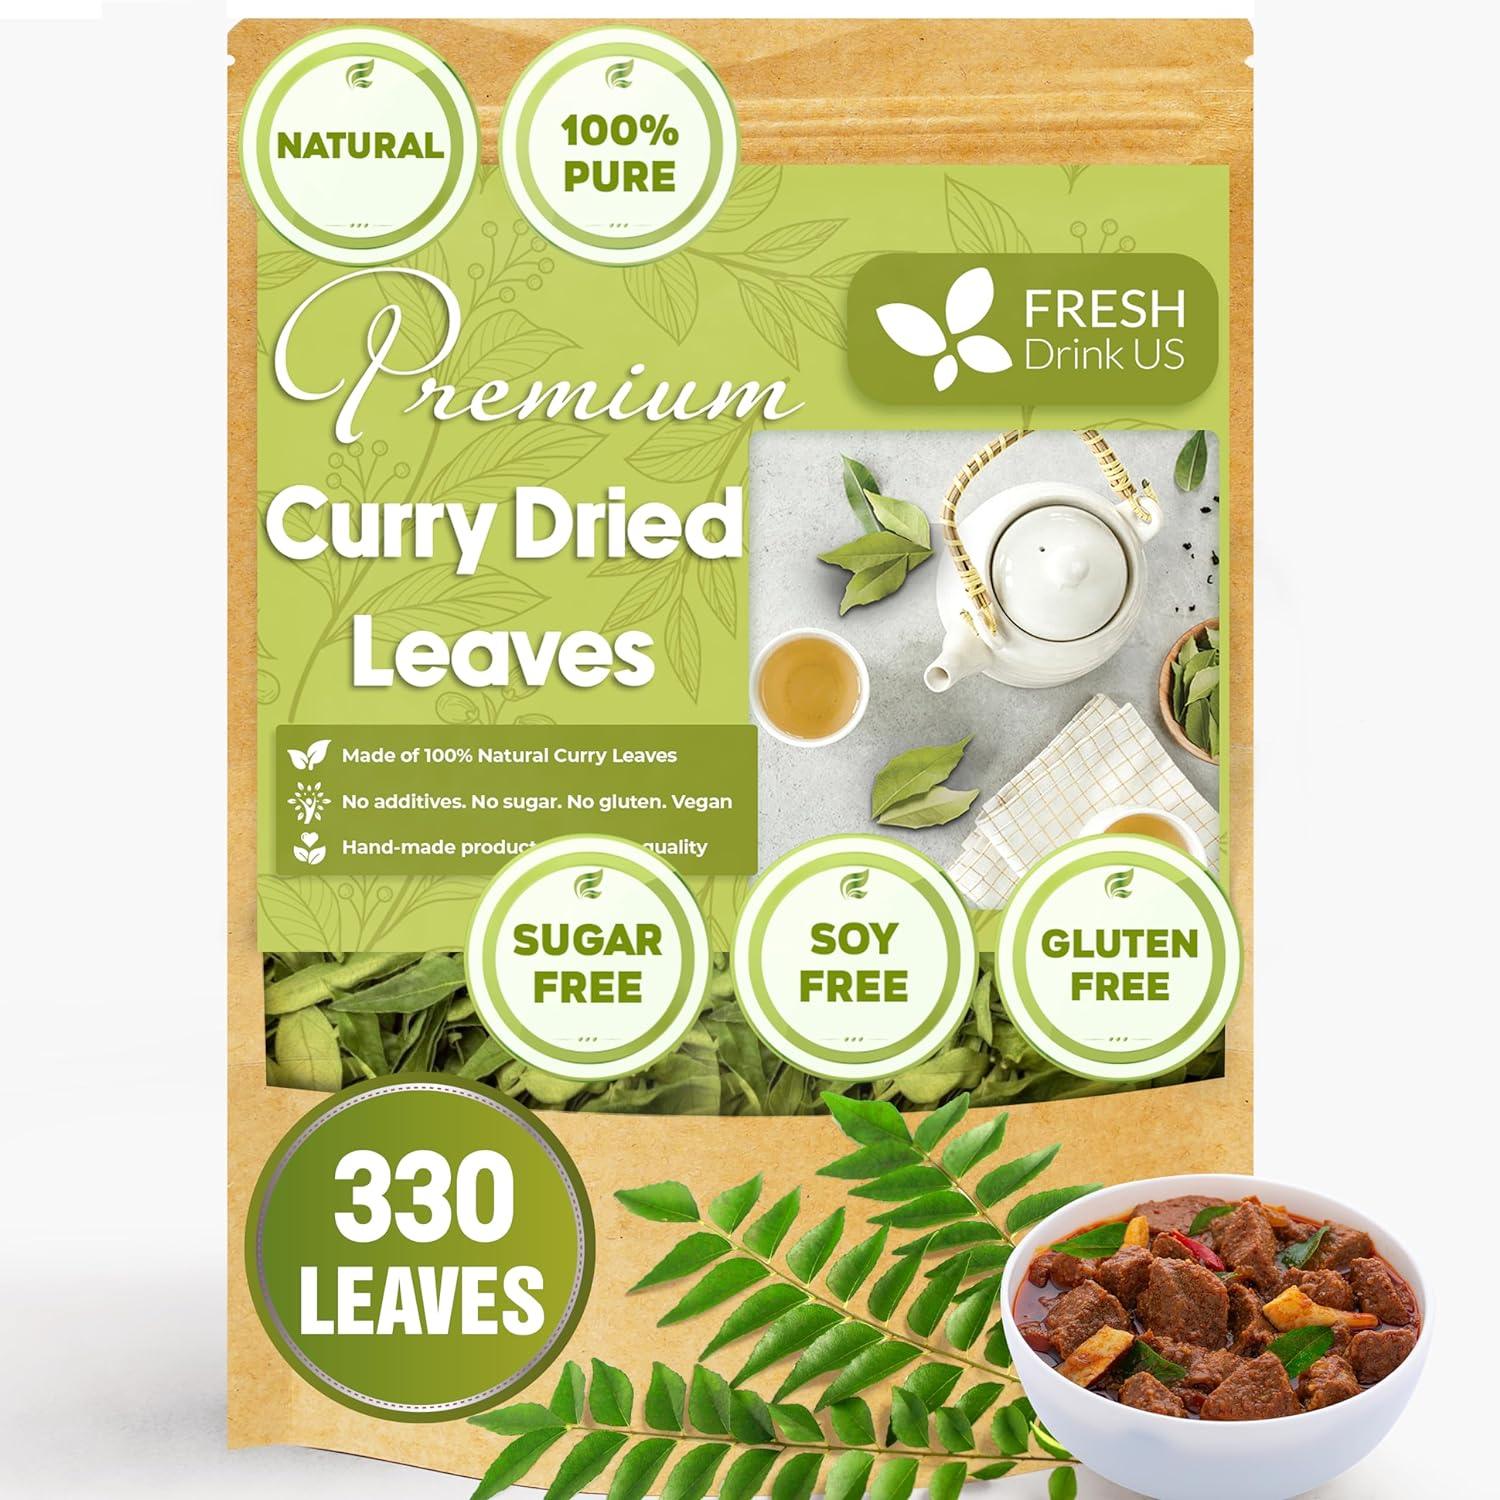 Premium Curry Leaves, Whole Dried Leaves, 100% Natural, Pure Curry Leaves, Hand-made, Wildcrafted, Indian Spice for Cooking, Curry Leaf Dried, No Additives, No Gluten, Vegan - FreshDrinkUS - Natural and Premium Herbal Tea